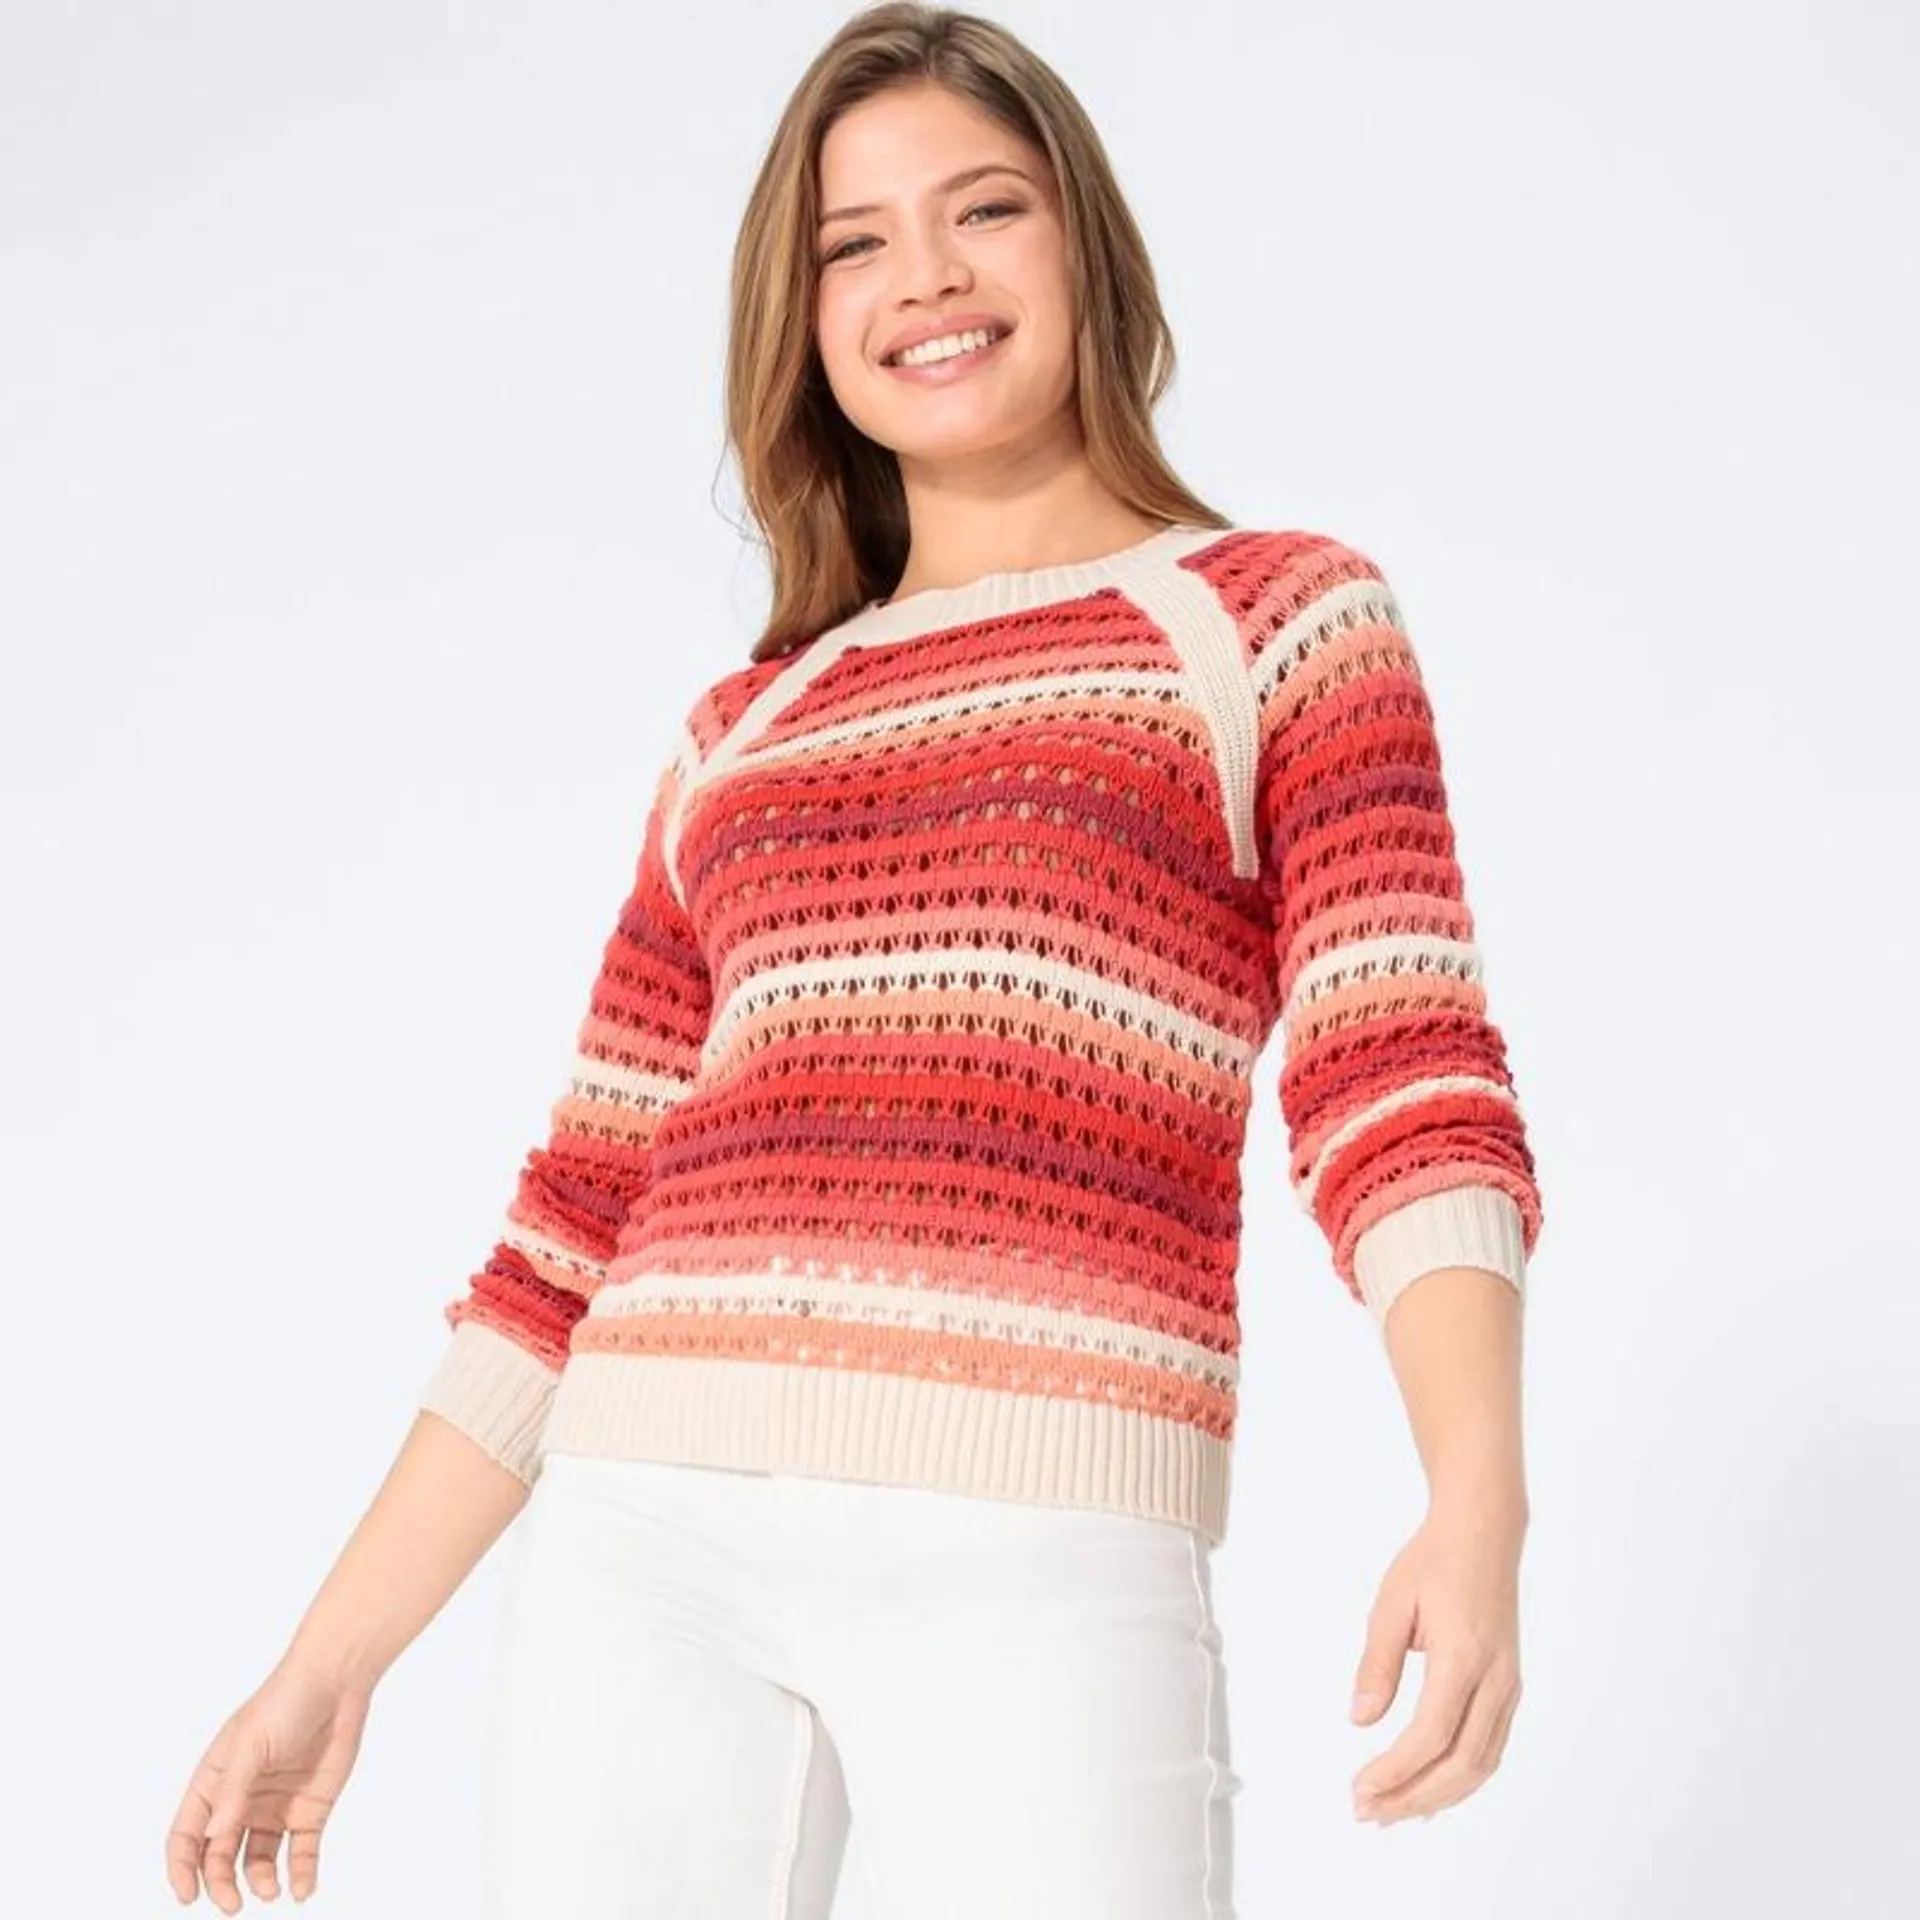 Damen-Pullover mit Ajour-Muster